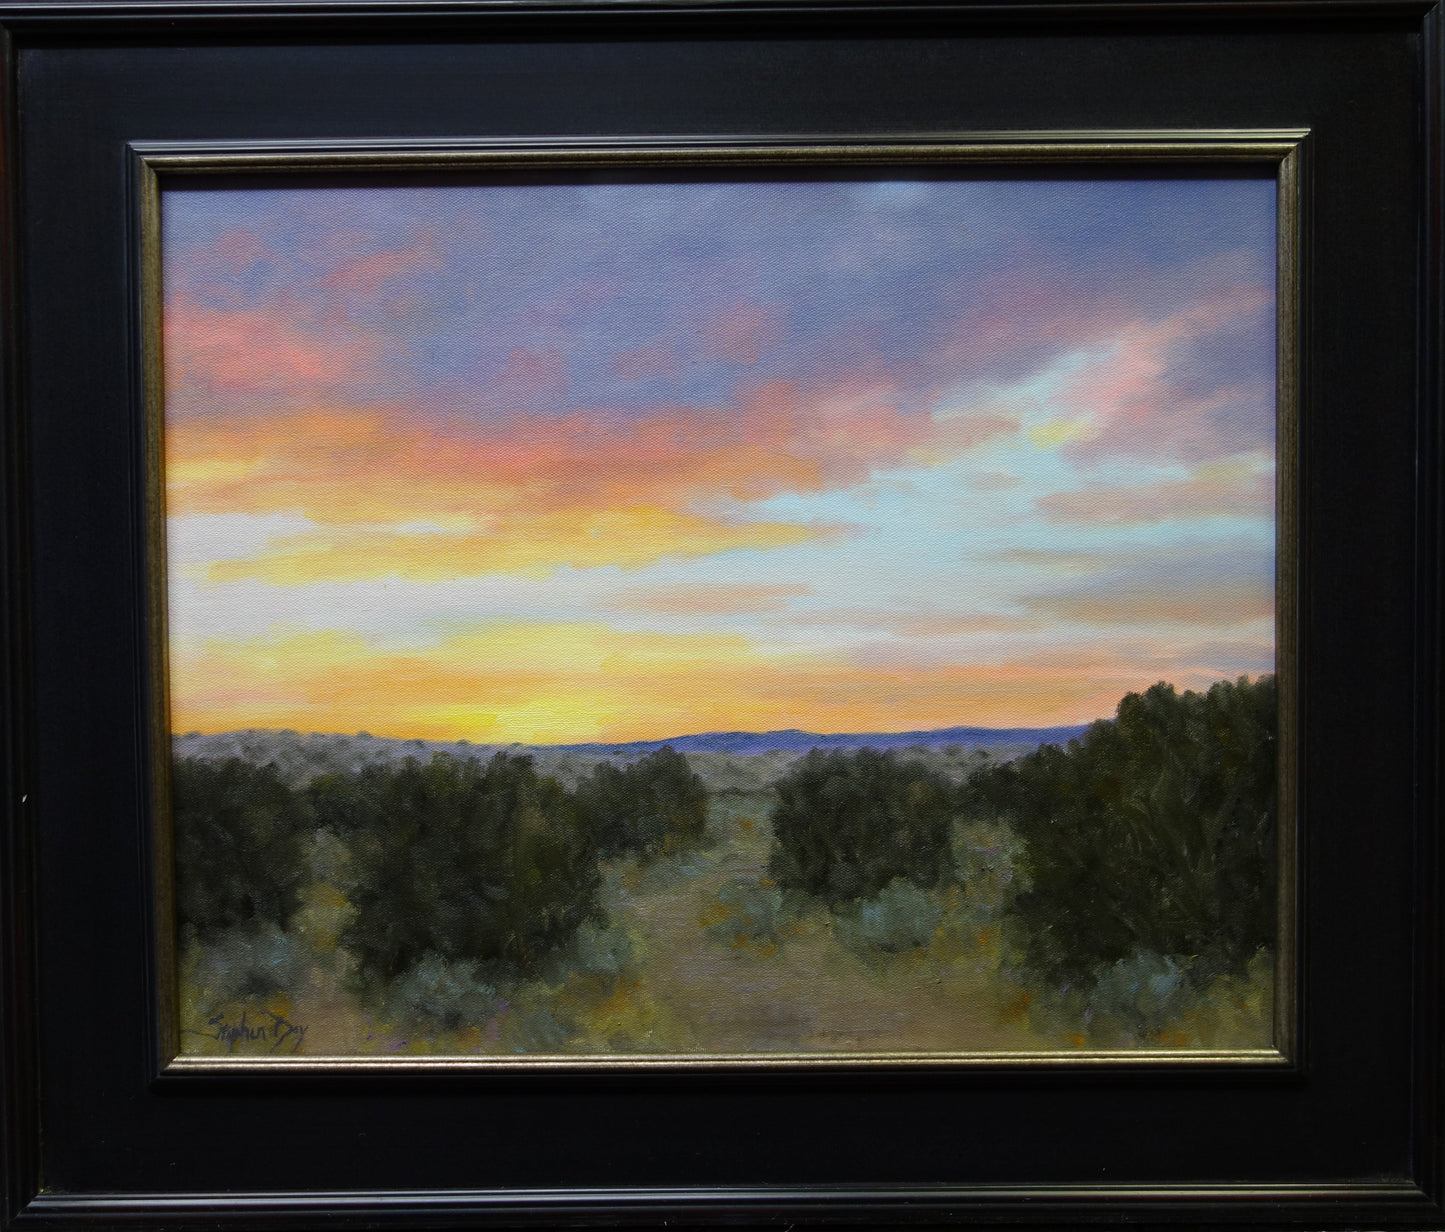 Special Evening-Painting-Stephen Day-Sorrel Sky Gallery